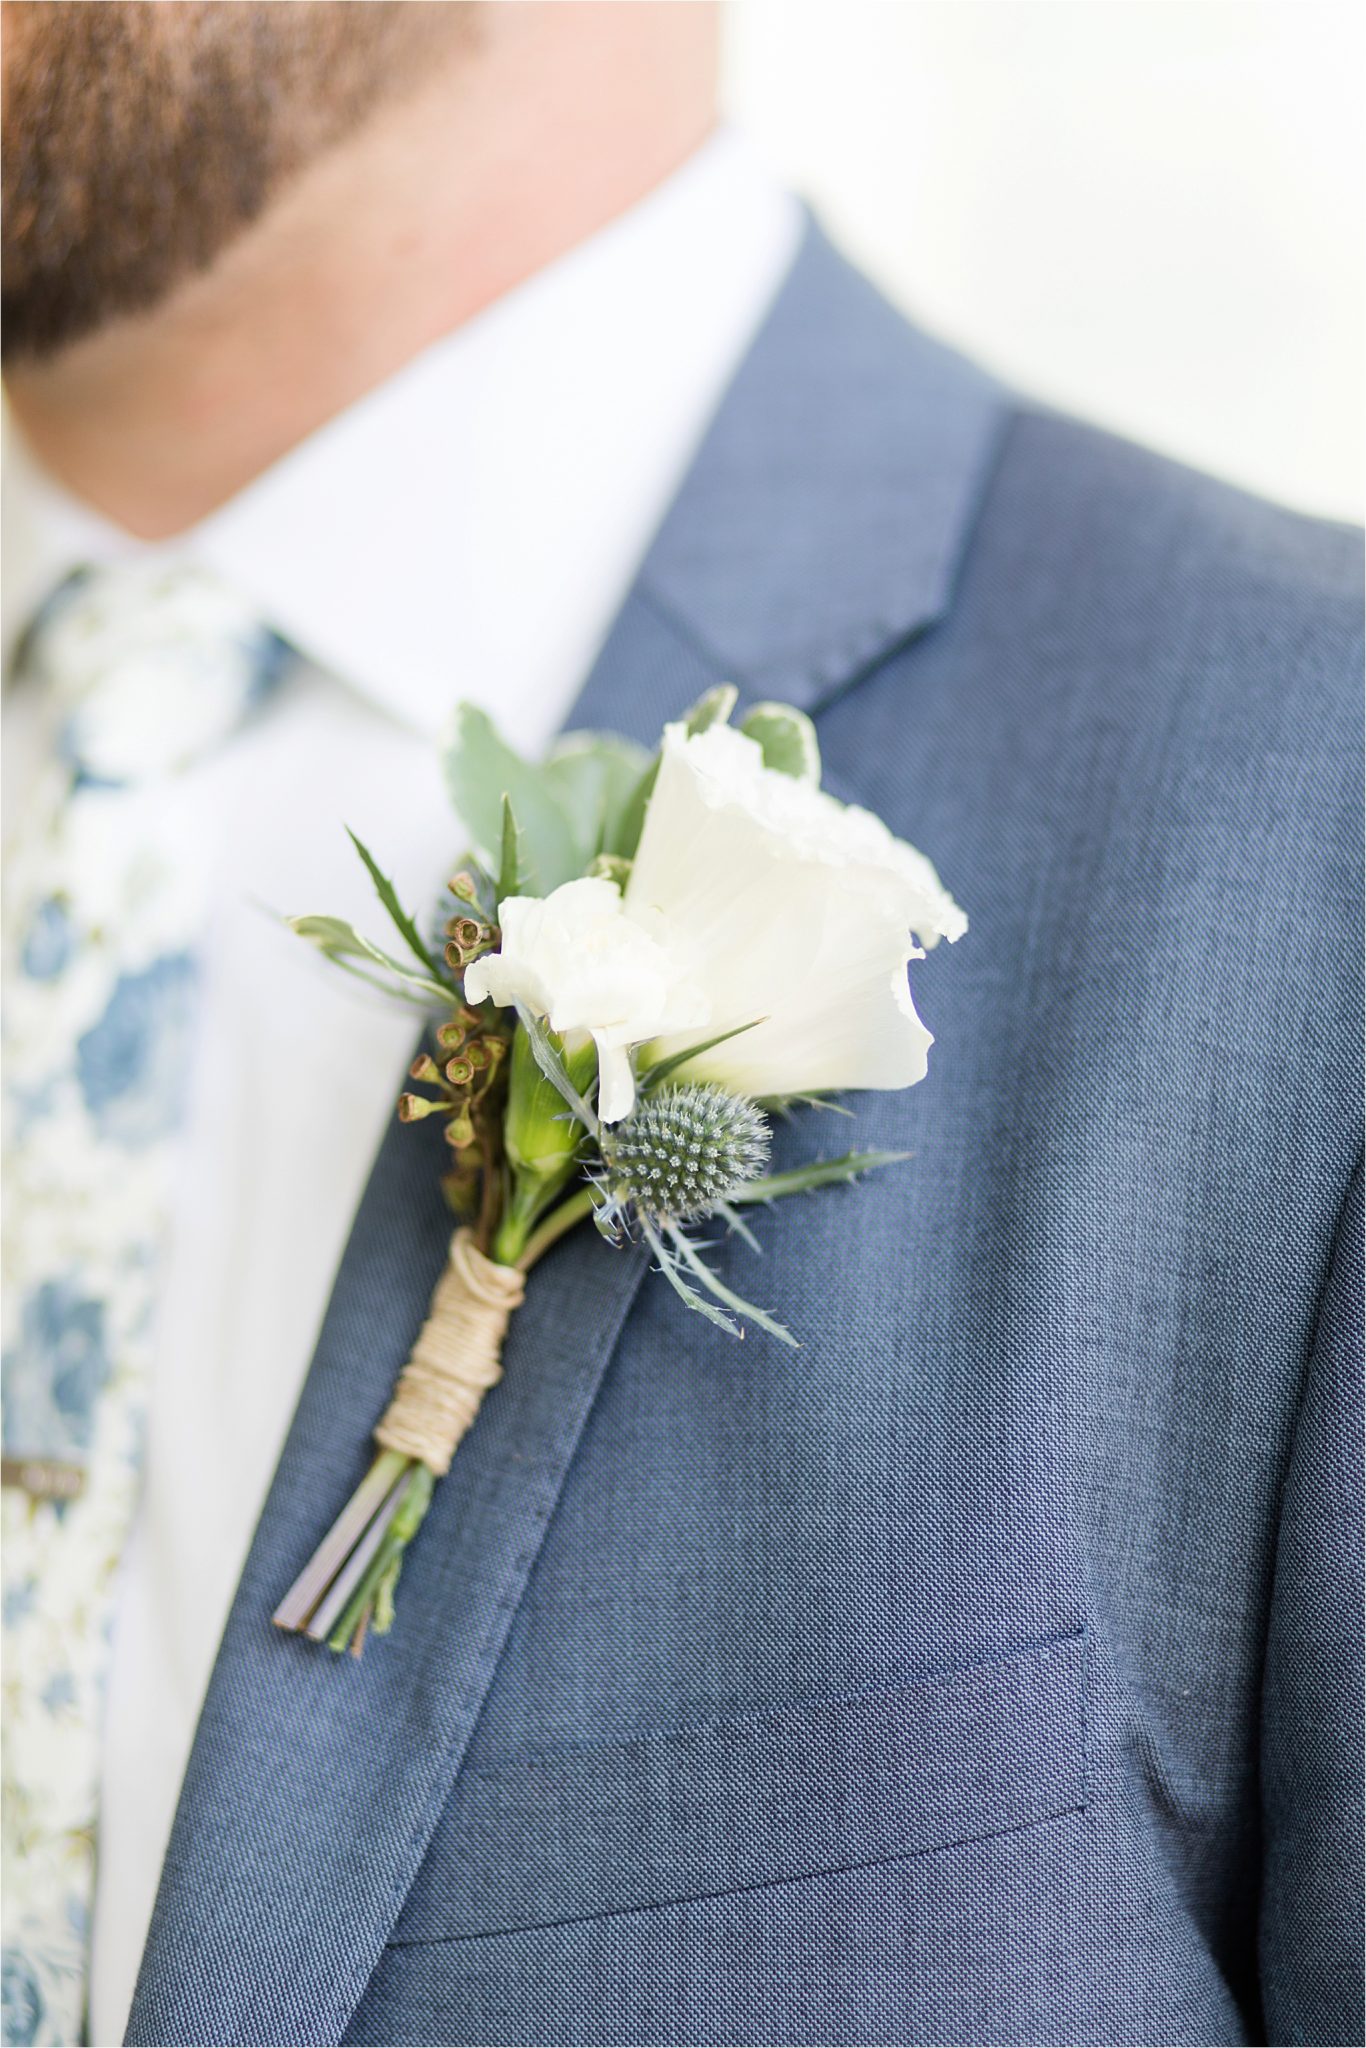 Pastel Themed Wedding-The Chapel at the Waters-Montgomery Alabama Photographer-Miles & Meredyth-Blue Themed Wedding-Groom's Tie-Groom Attire-White Boutonniere